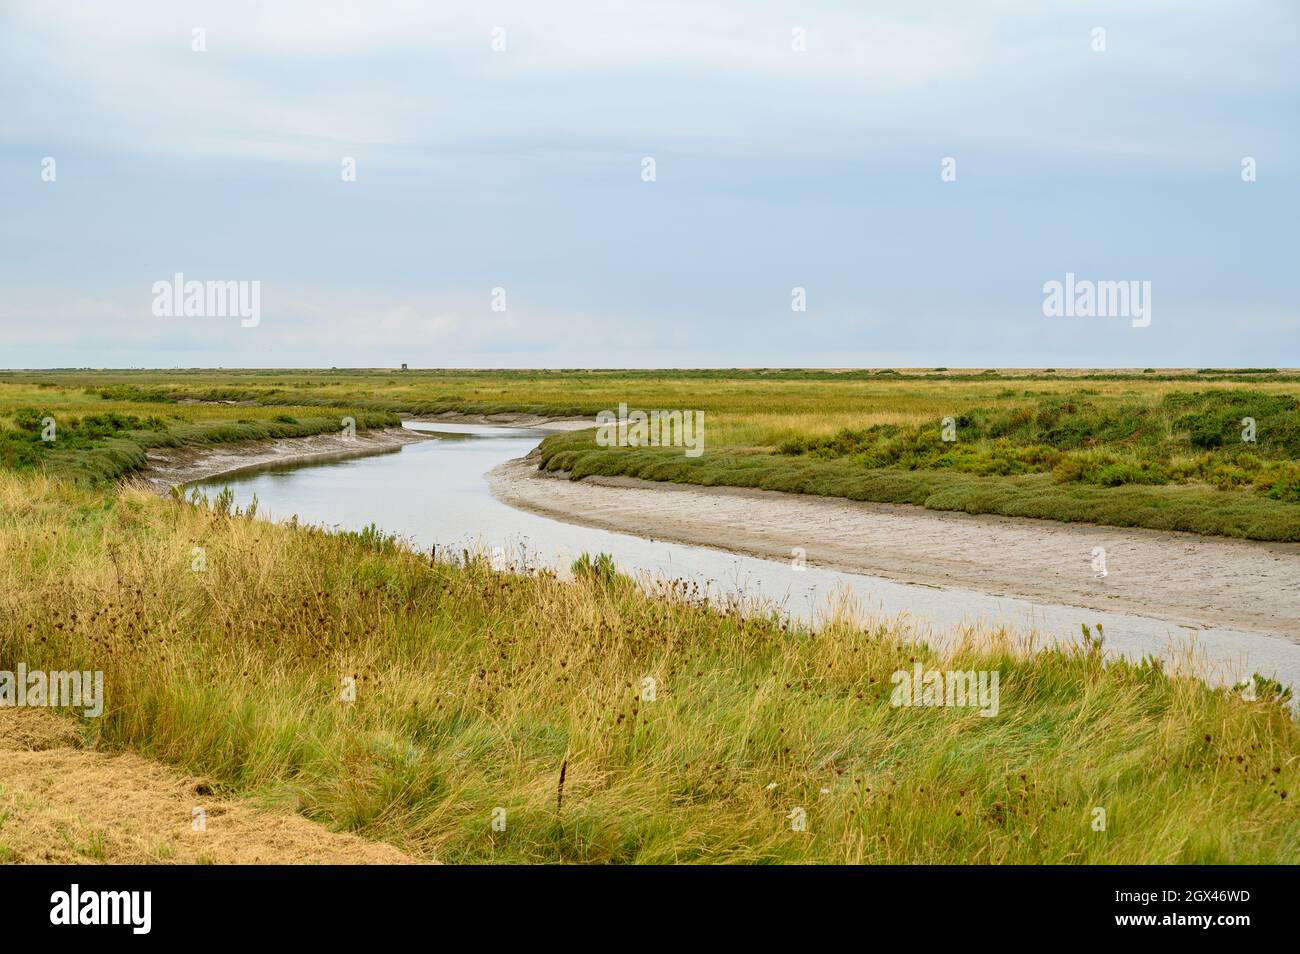 A nearly dry river Glaven winding through the Blakeney Natural Nature Reserve's marshland on the North Sea coast, Norfolk, England. Stock Photo